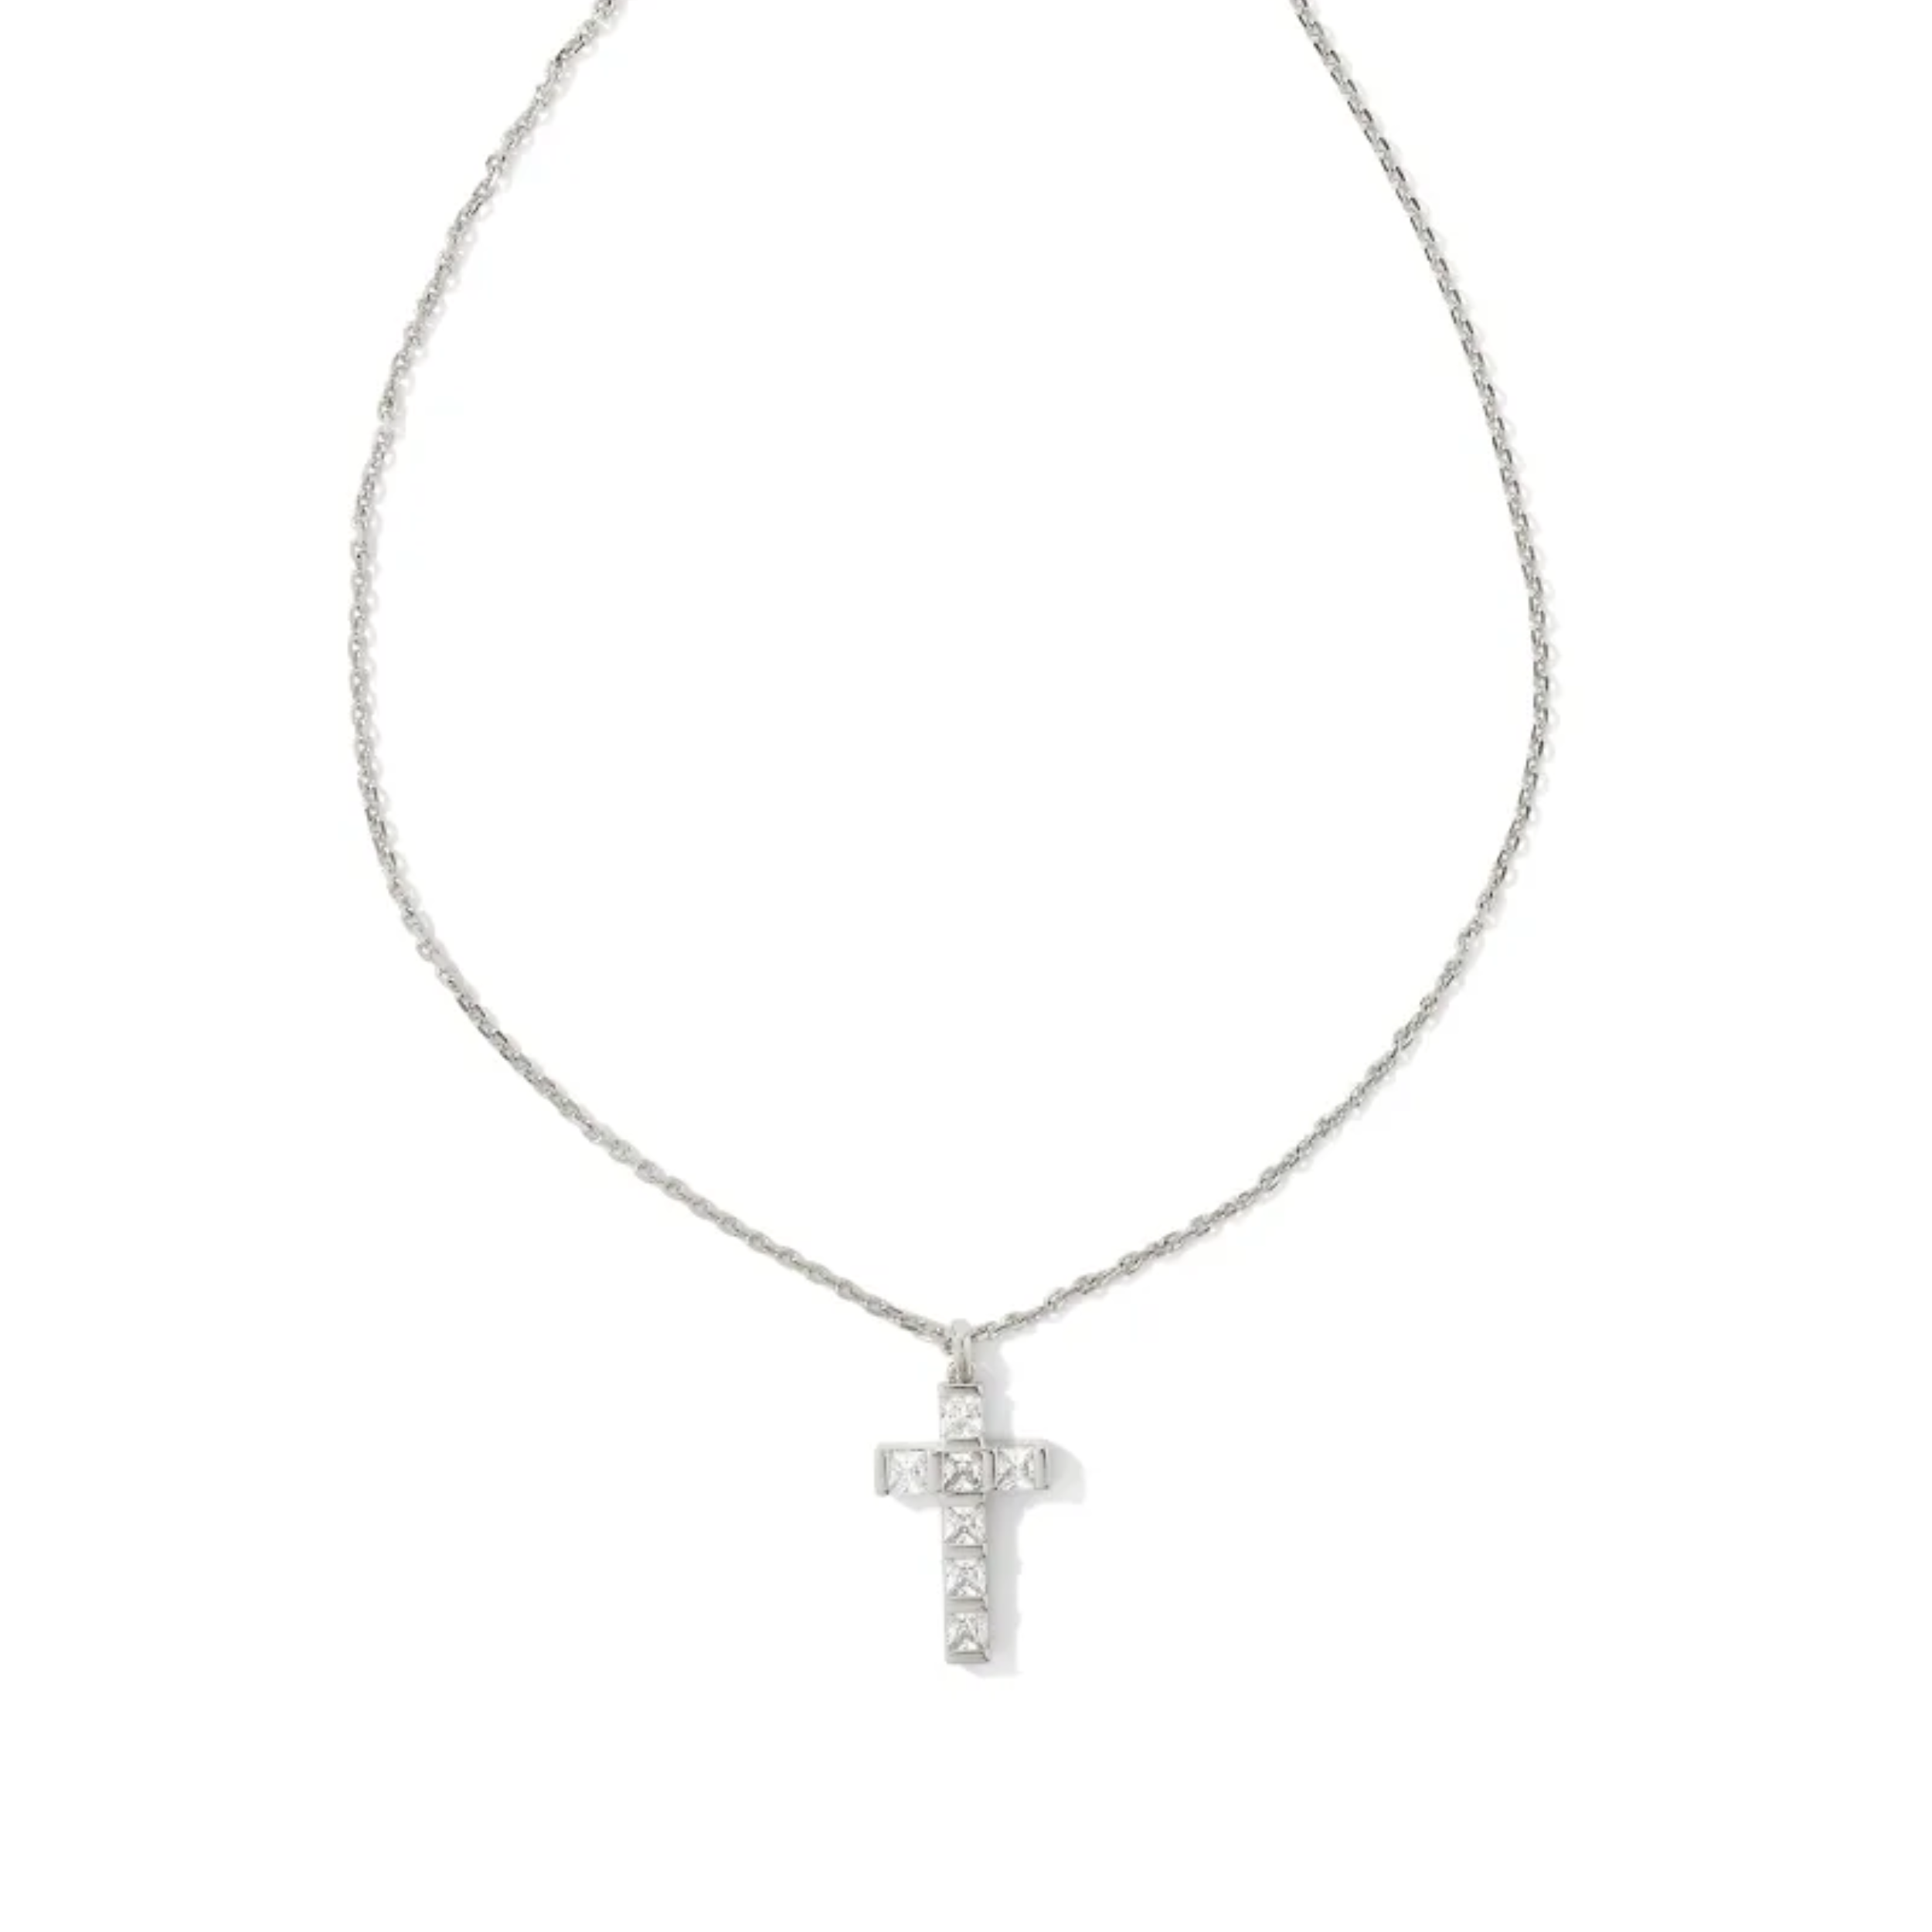 Kendra Scott | Gracie Silver Cross Pendant Necklace in White Crystal - Giddy Up Glamour Boutique